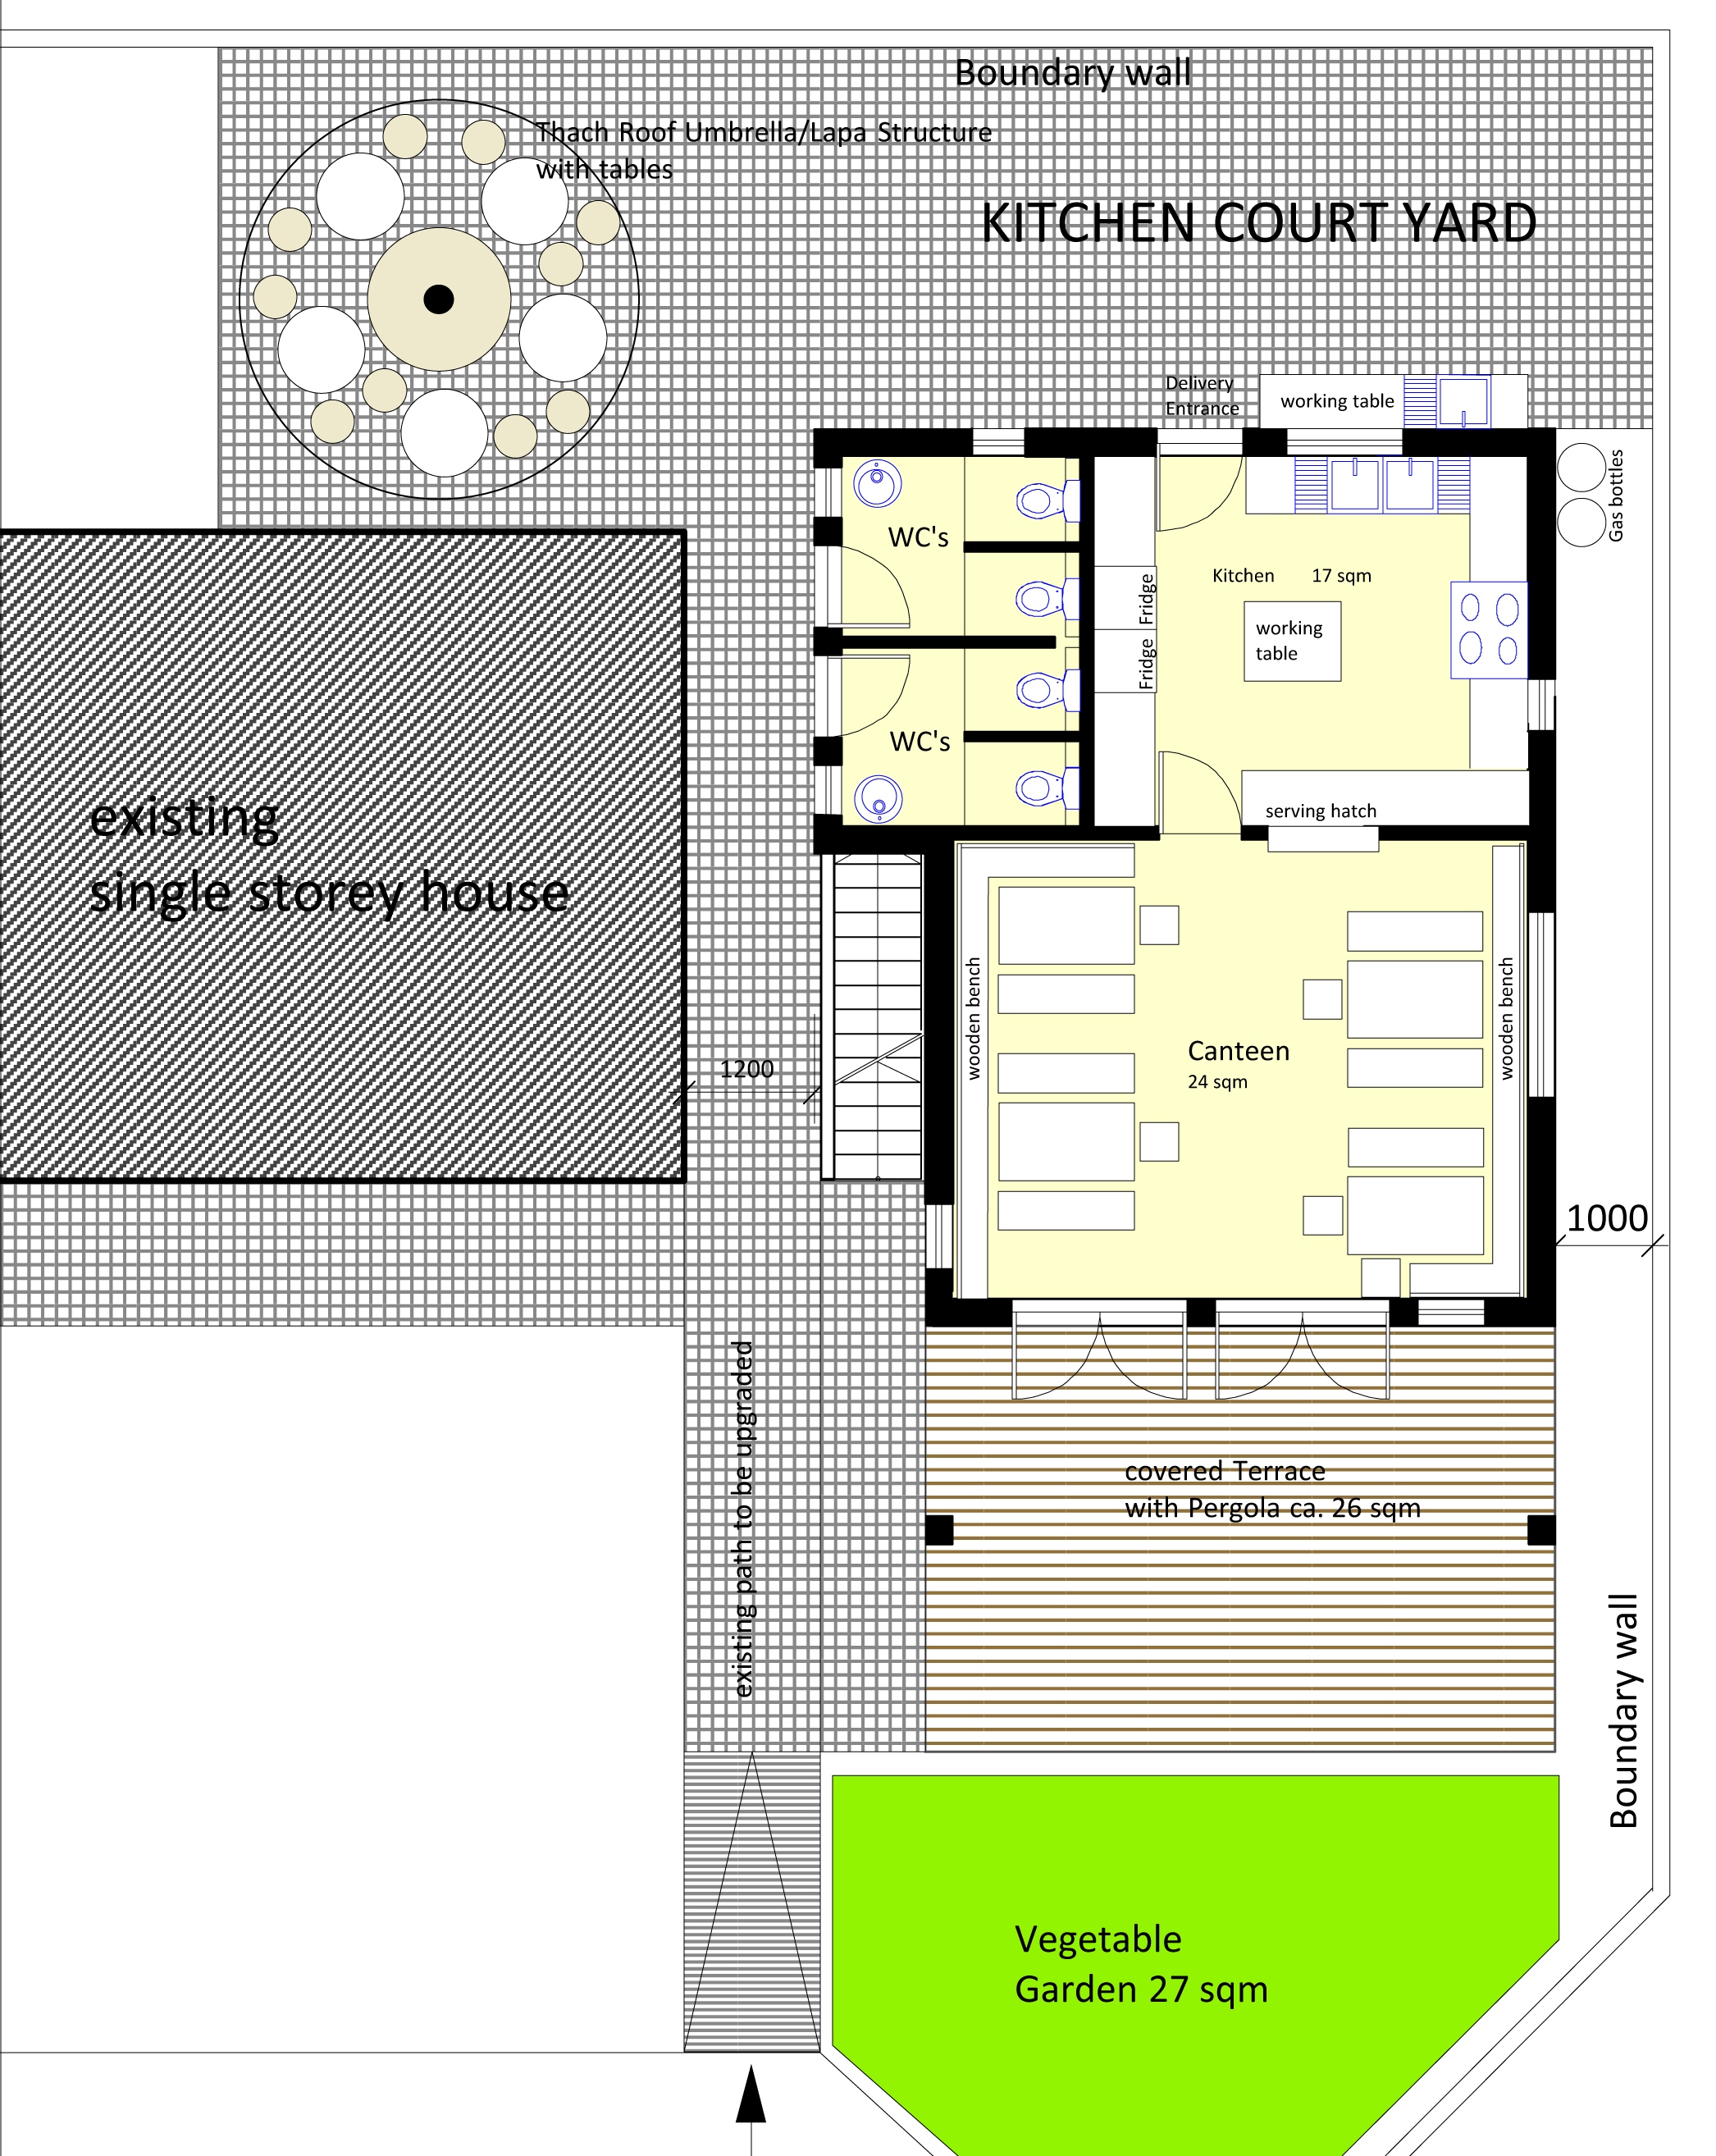 2013-04-25 PLANS with furnitures, SITE PLAN.jpg